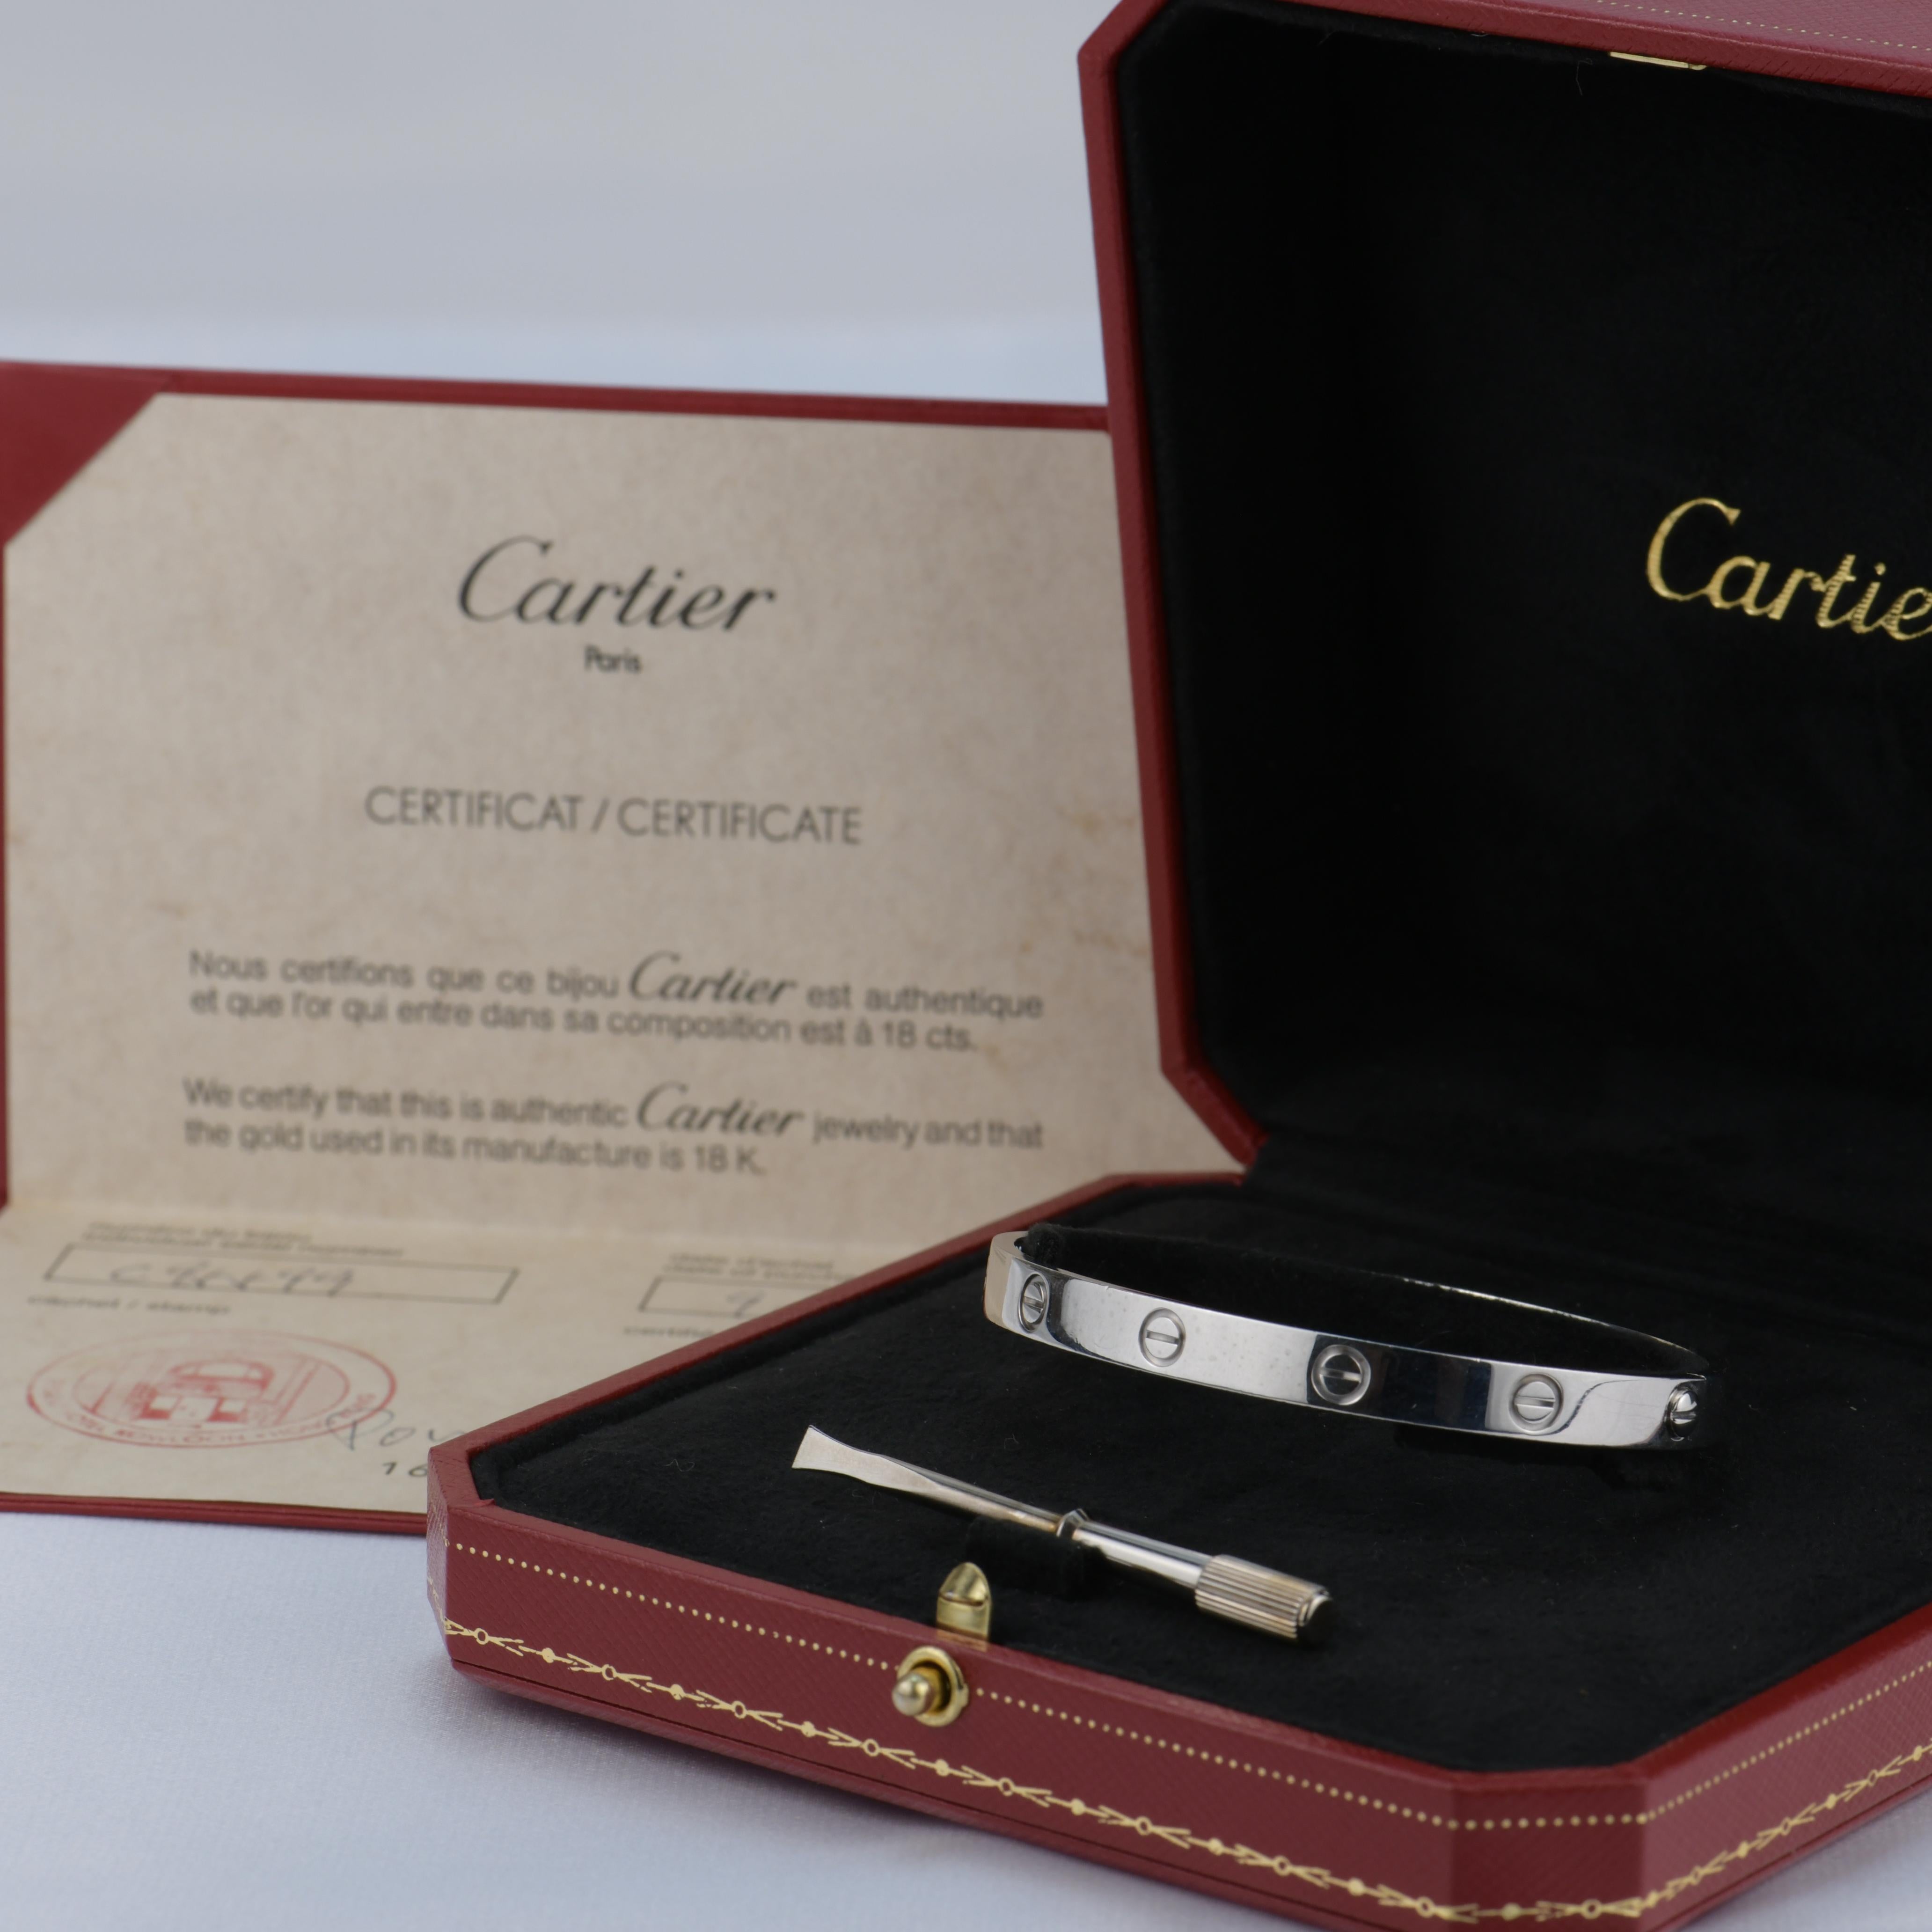 Dandelion Antiques Code	AT-0718
Brand	                                Cartier
Model	                                B6005800
Date	                                1996
Retail Price	                        £6250 / $7400 including